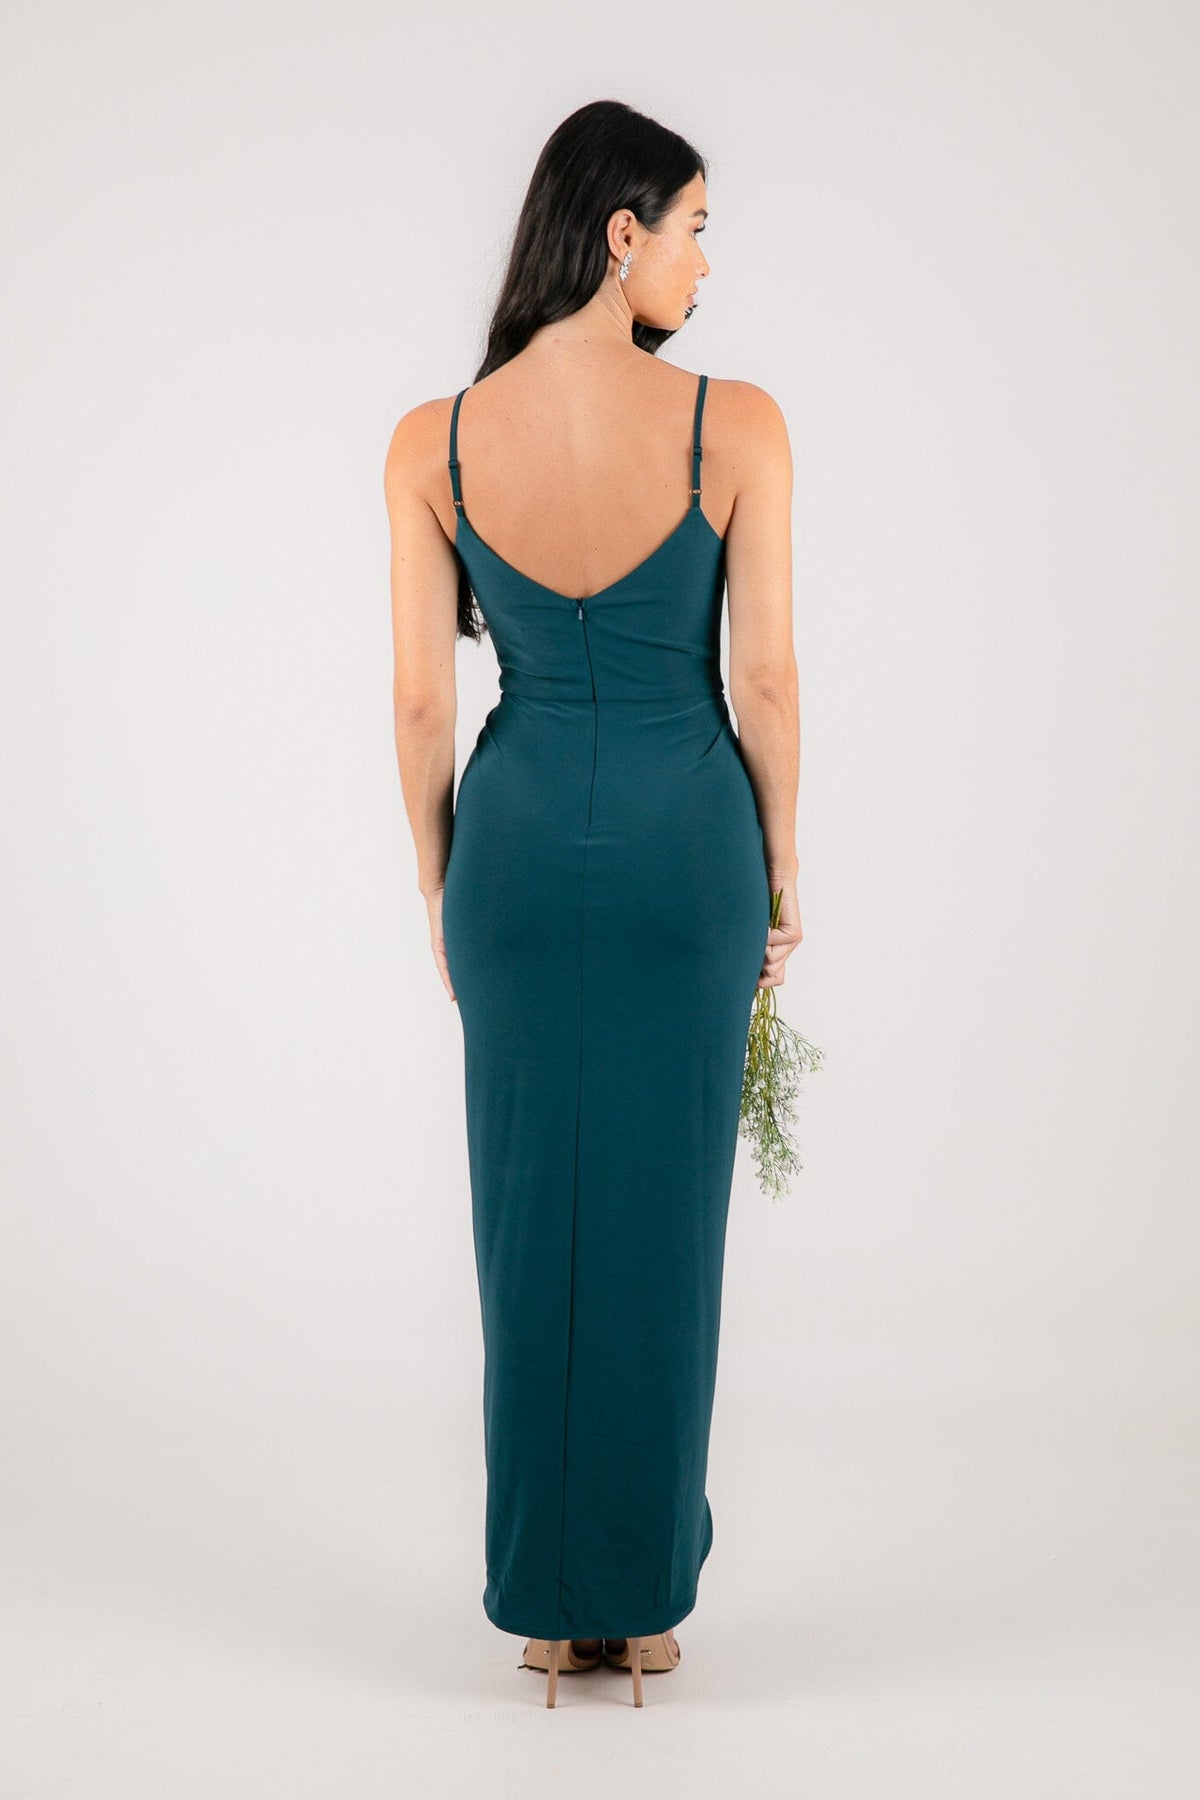 Open Back with Adjustable Straps of Teal Green Bridesmaid Maxi Dress with Faux Wrap Front Design and Asymmetrical Slim-Fit Skirt with Centre Split